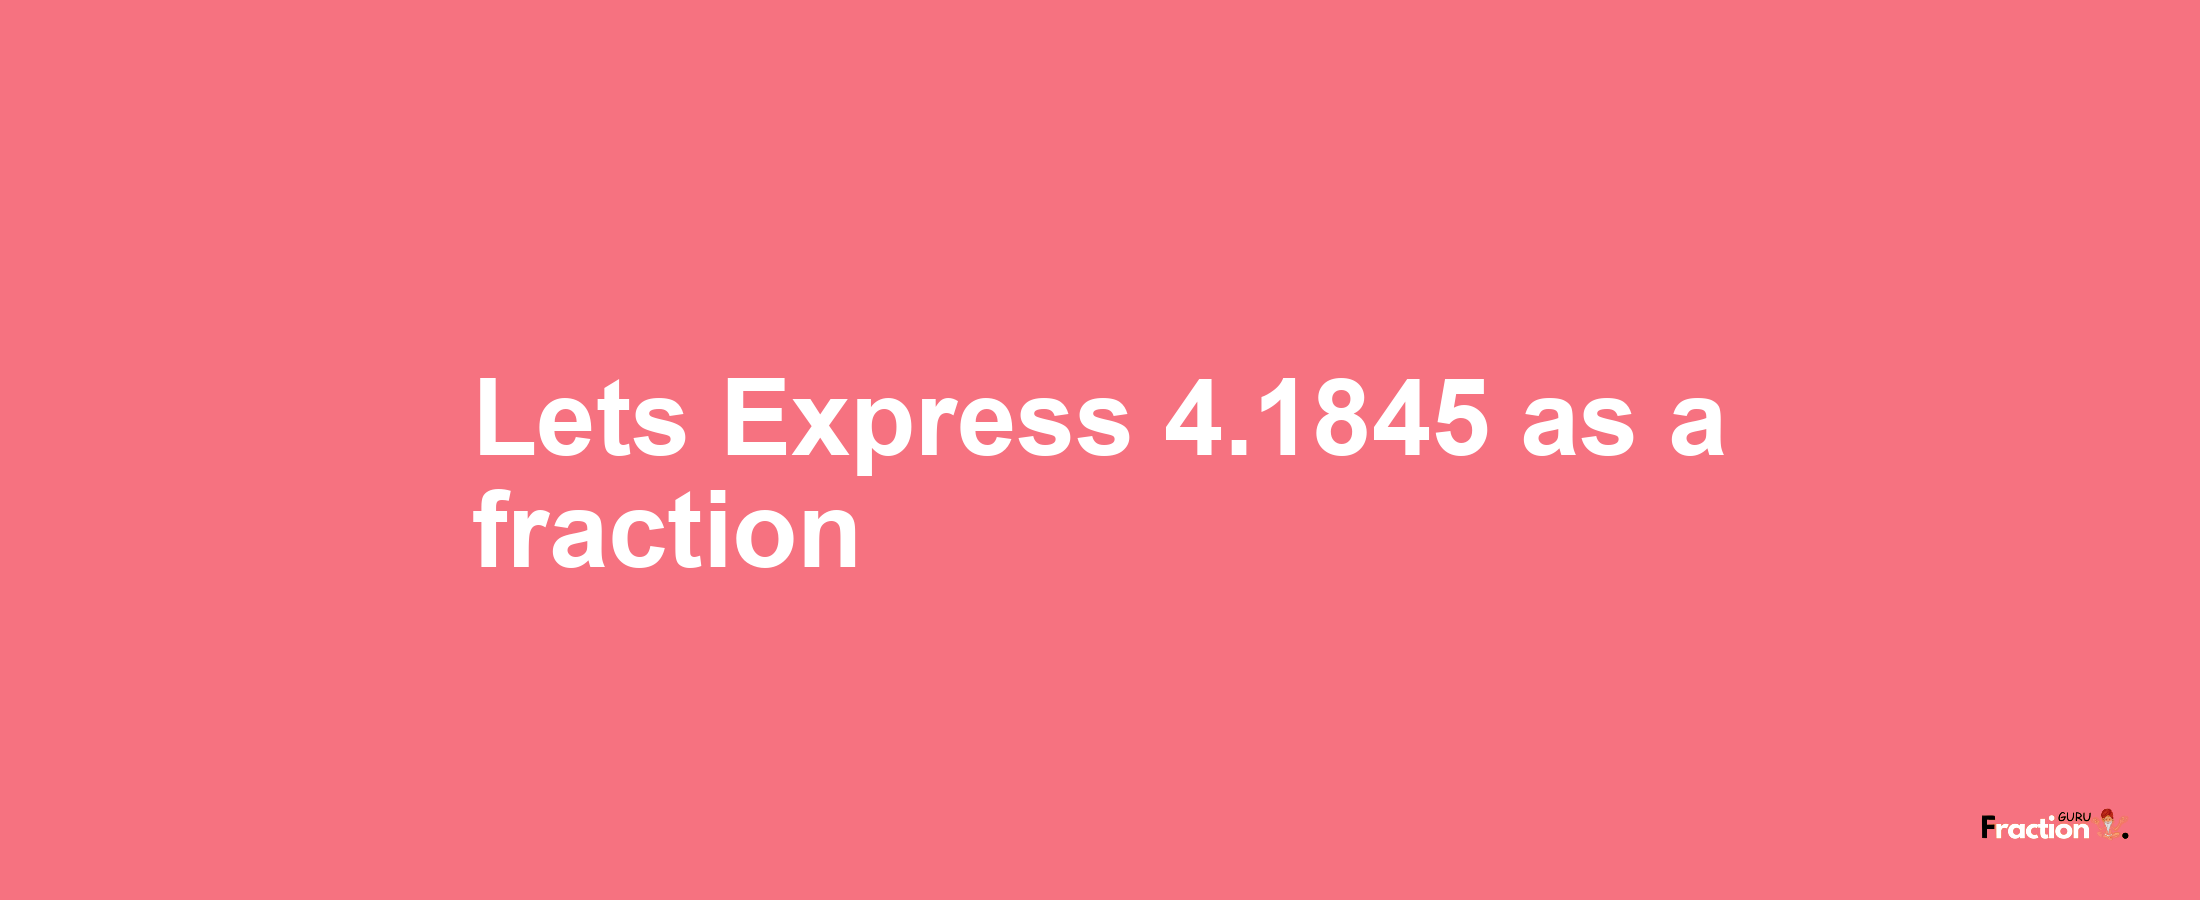 Lets Express 4.1845 as afraction